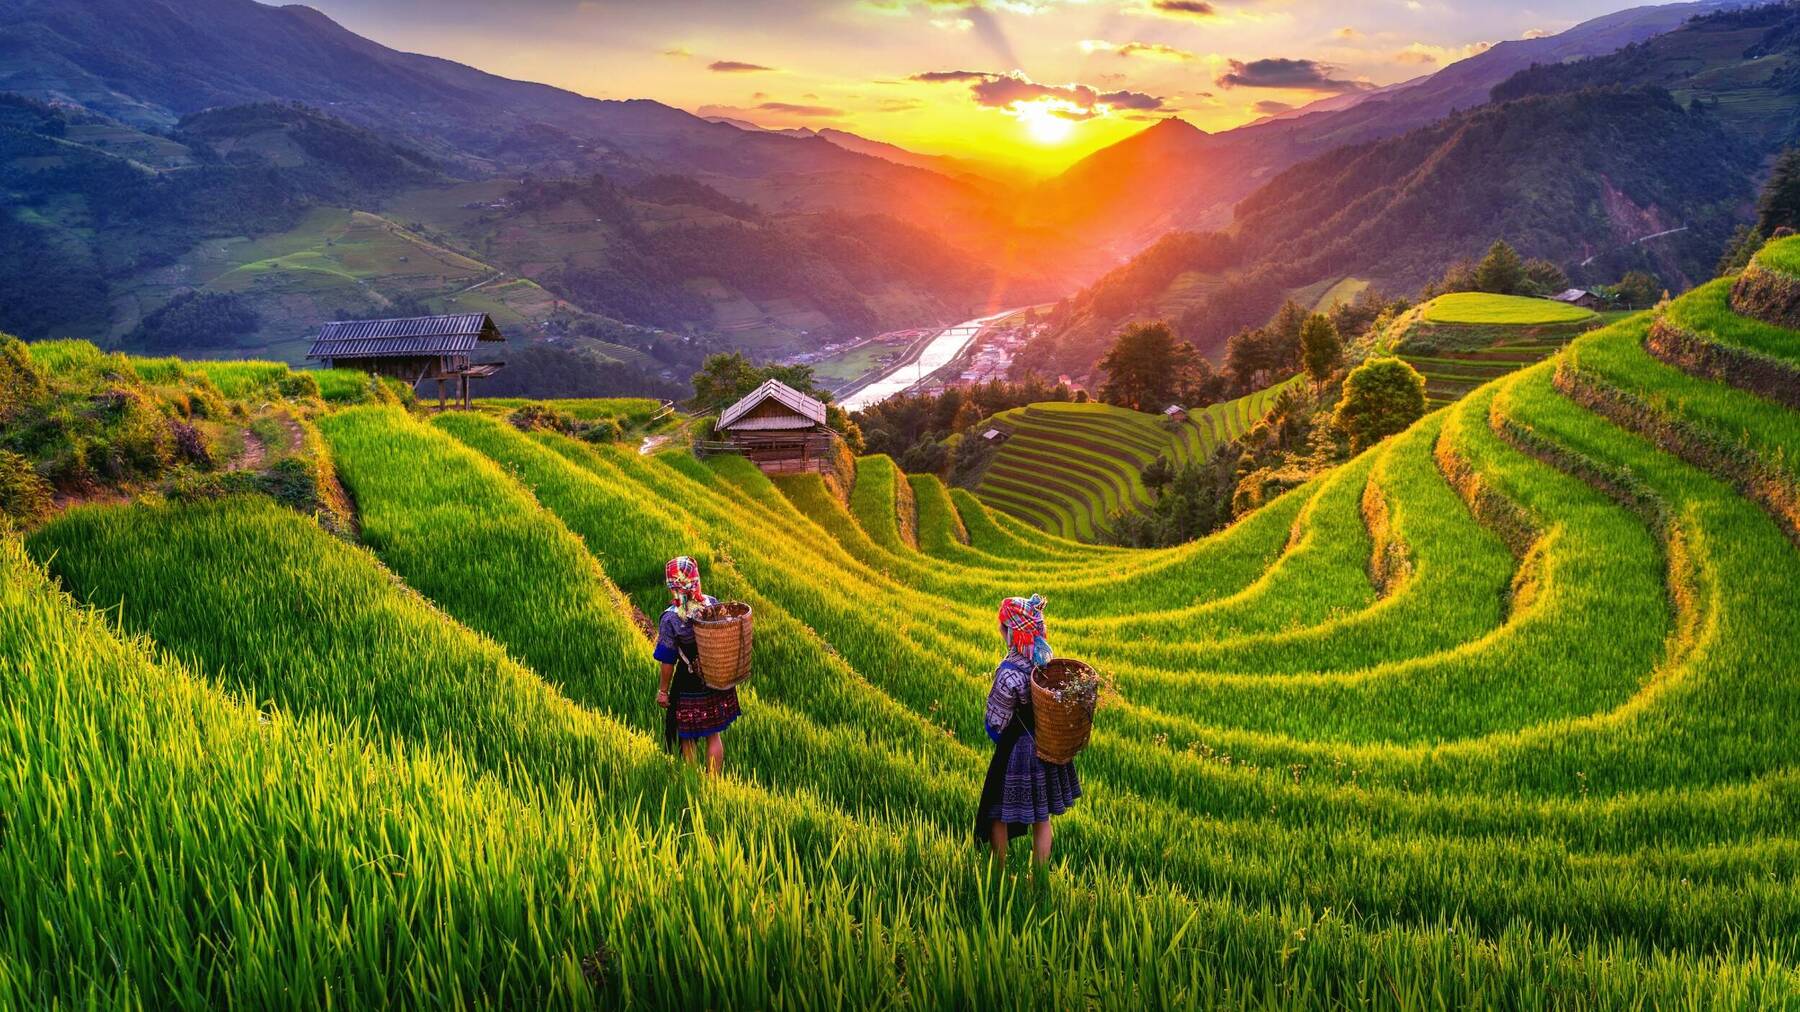 Vietnam - The Land of the Ascending Dragon